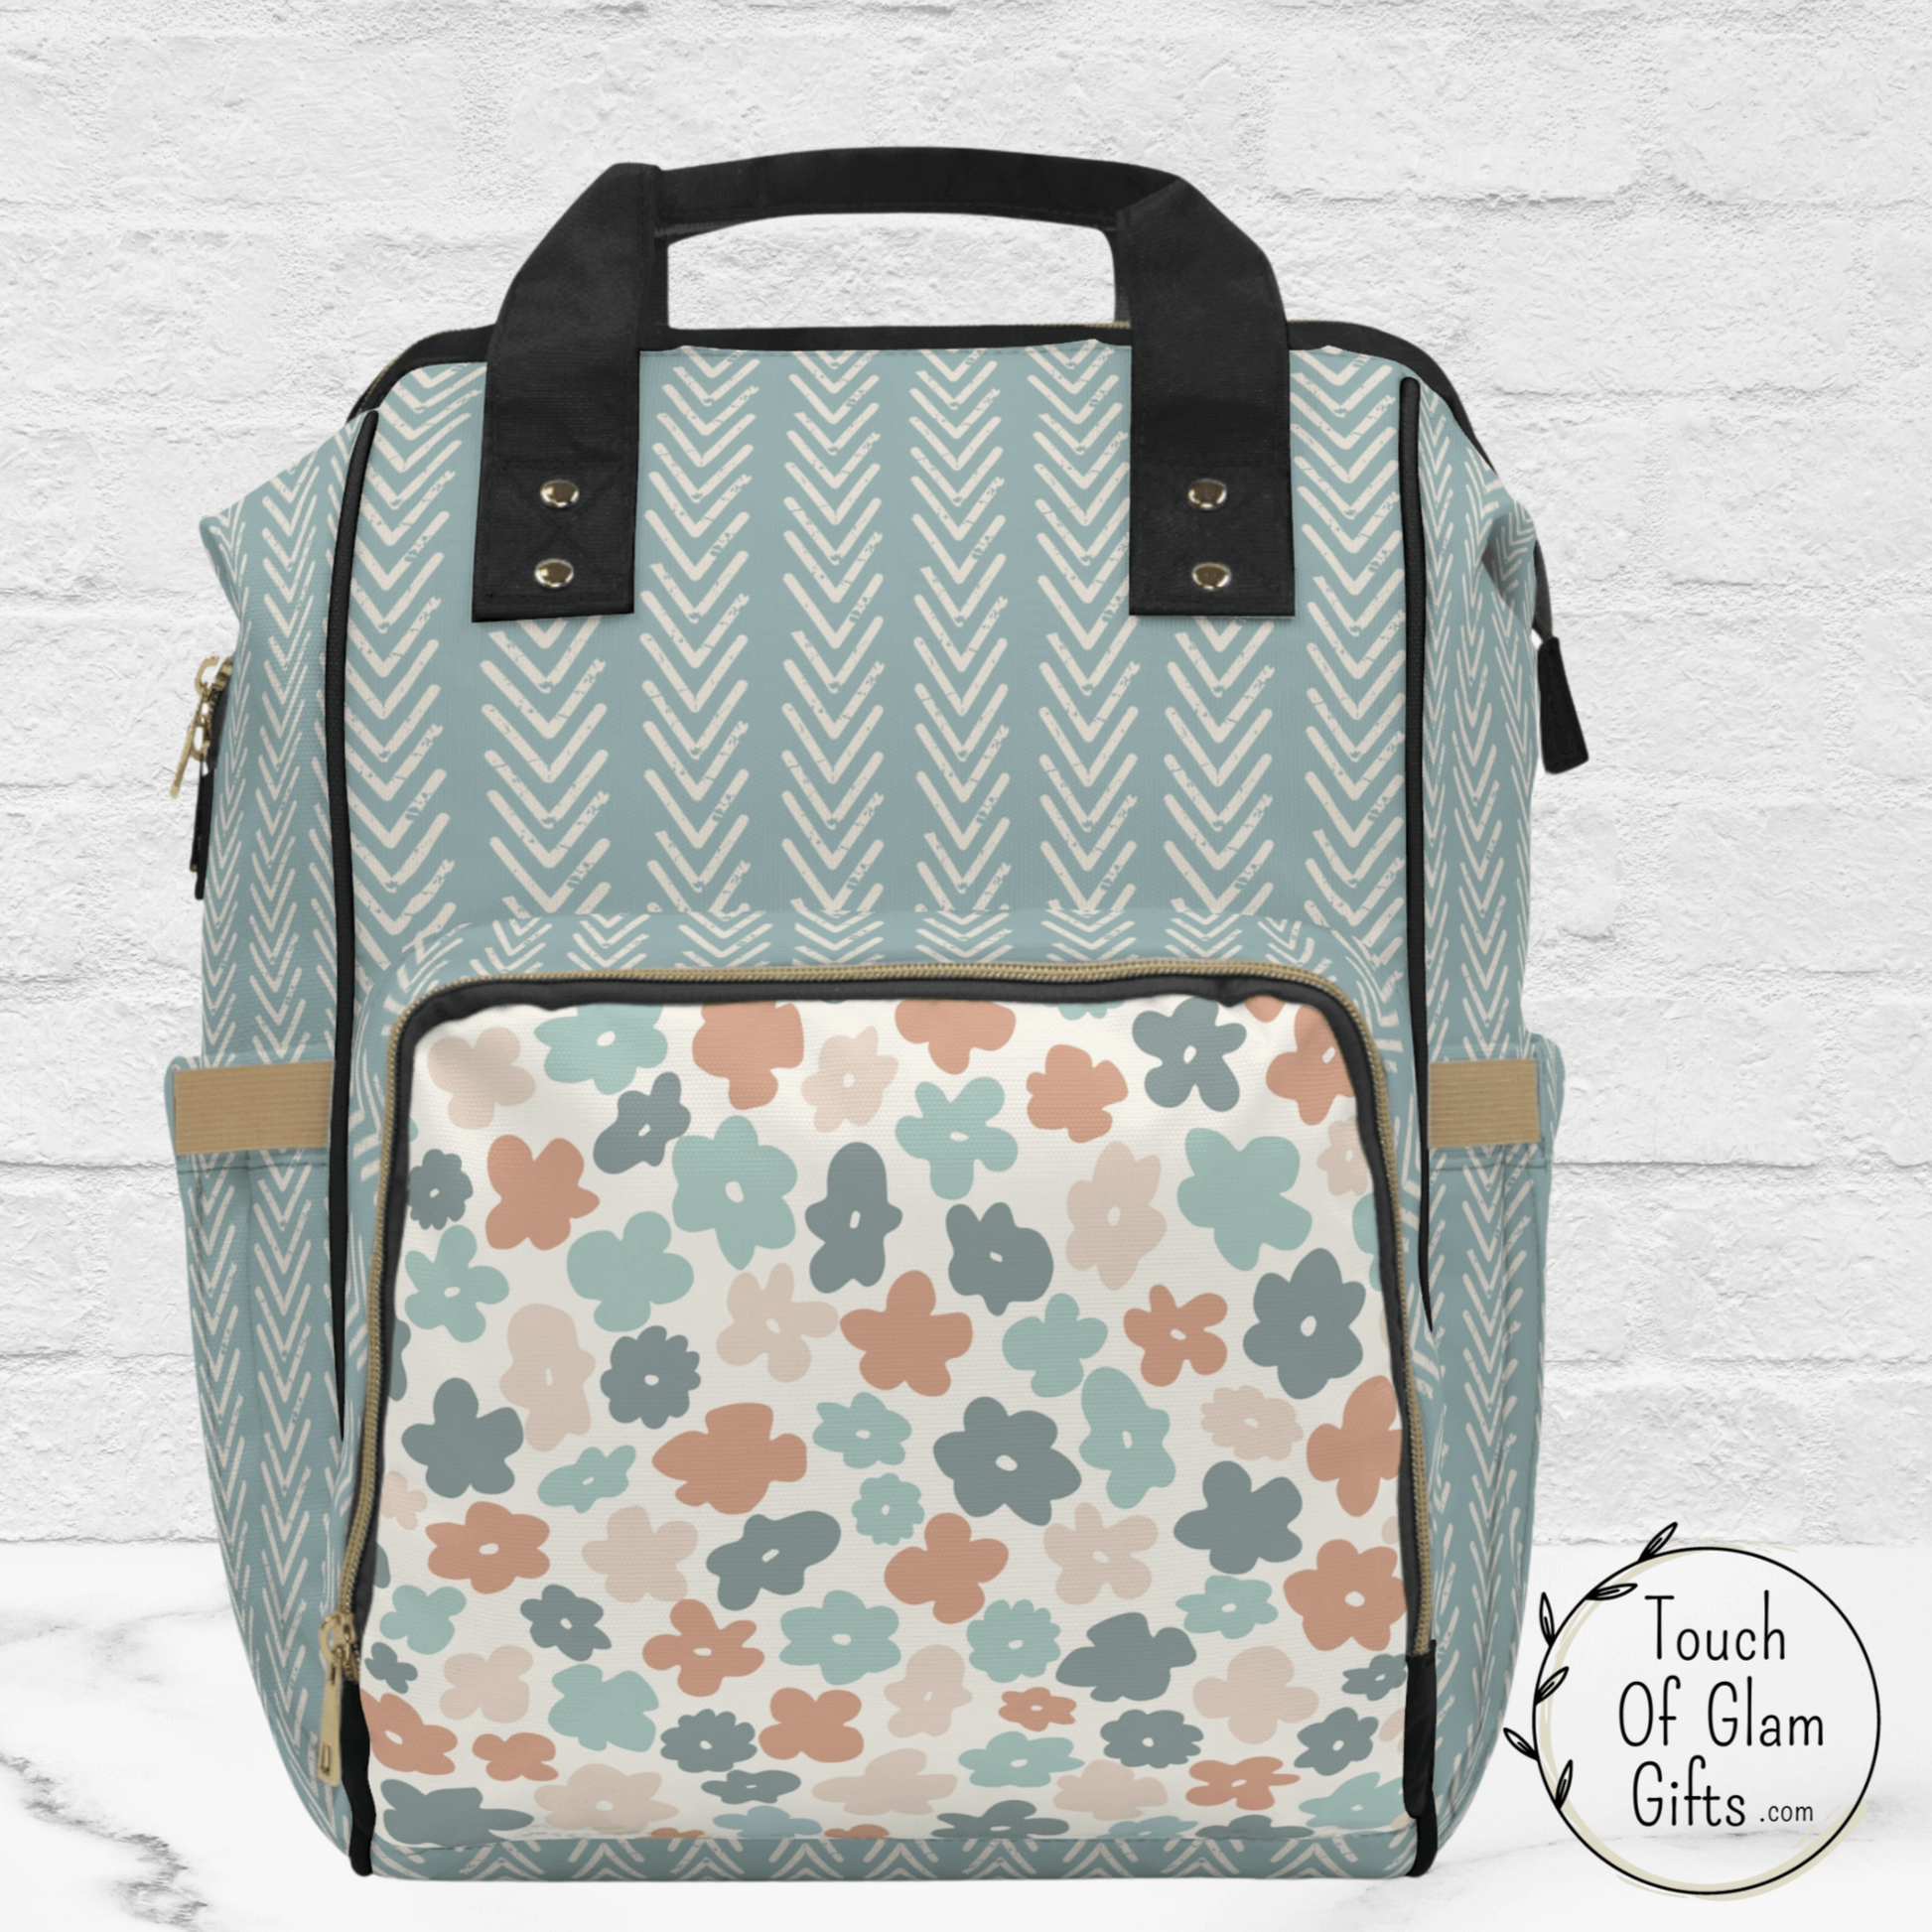 This cute diaper bag backpack makes carrying kids stuff around much trendier. This bag makes a great hands free travel backpack for women at the airport too.  The boho colors are great for any outfit.